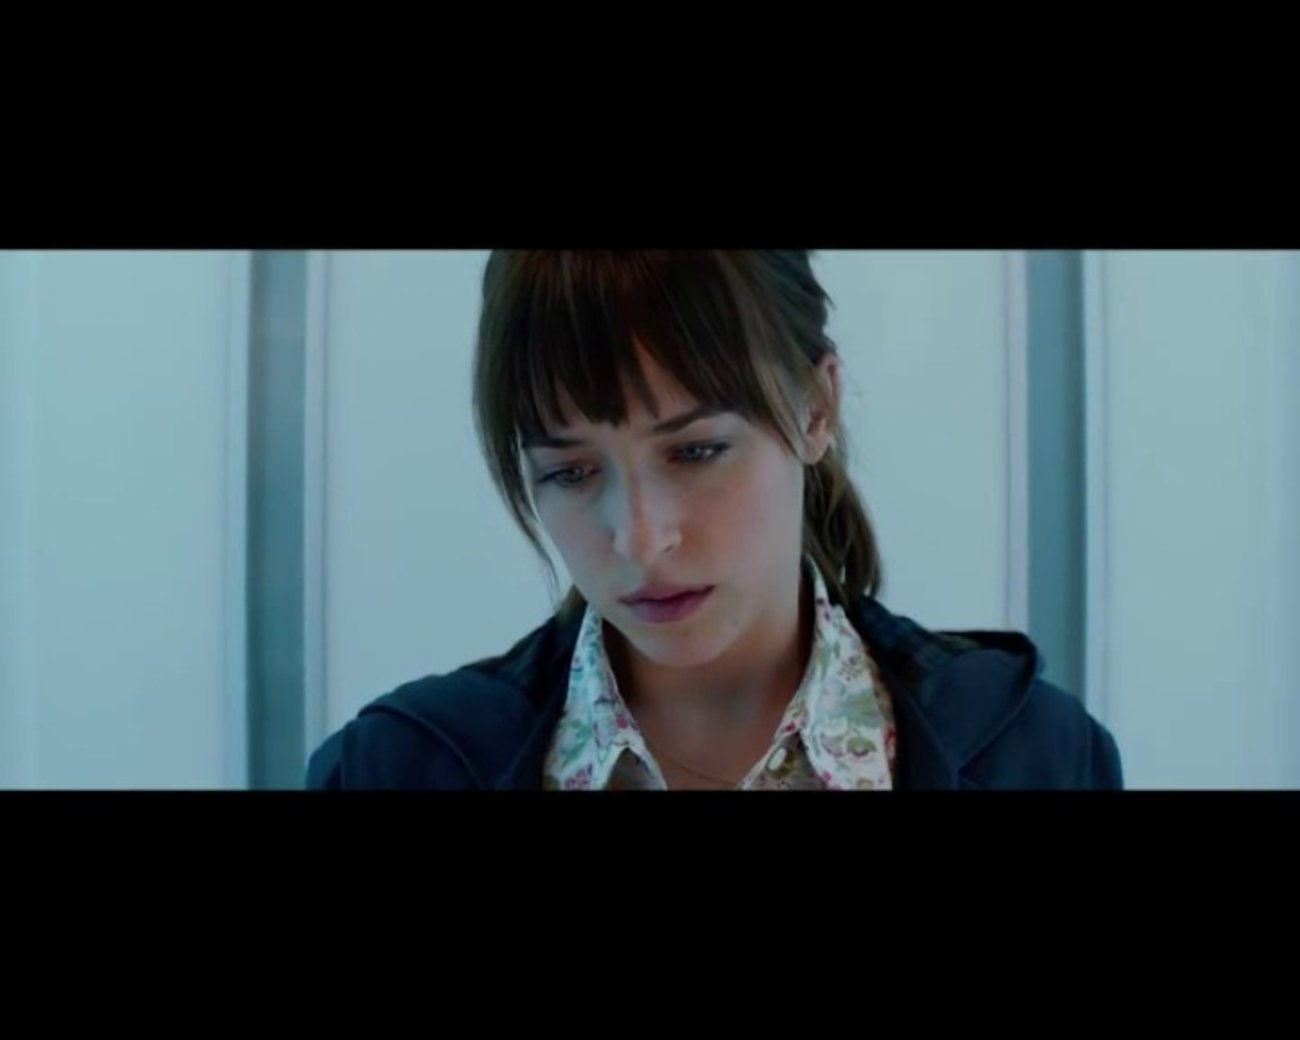 fifty-shades-of-grey-trailer-clip-119018.mp4